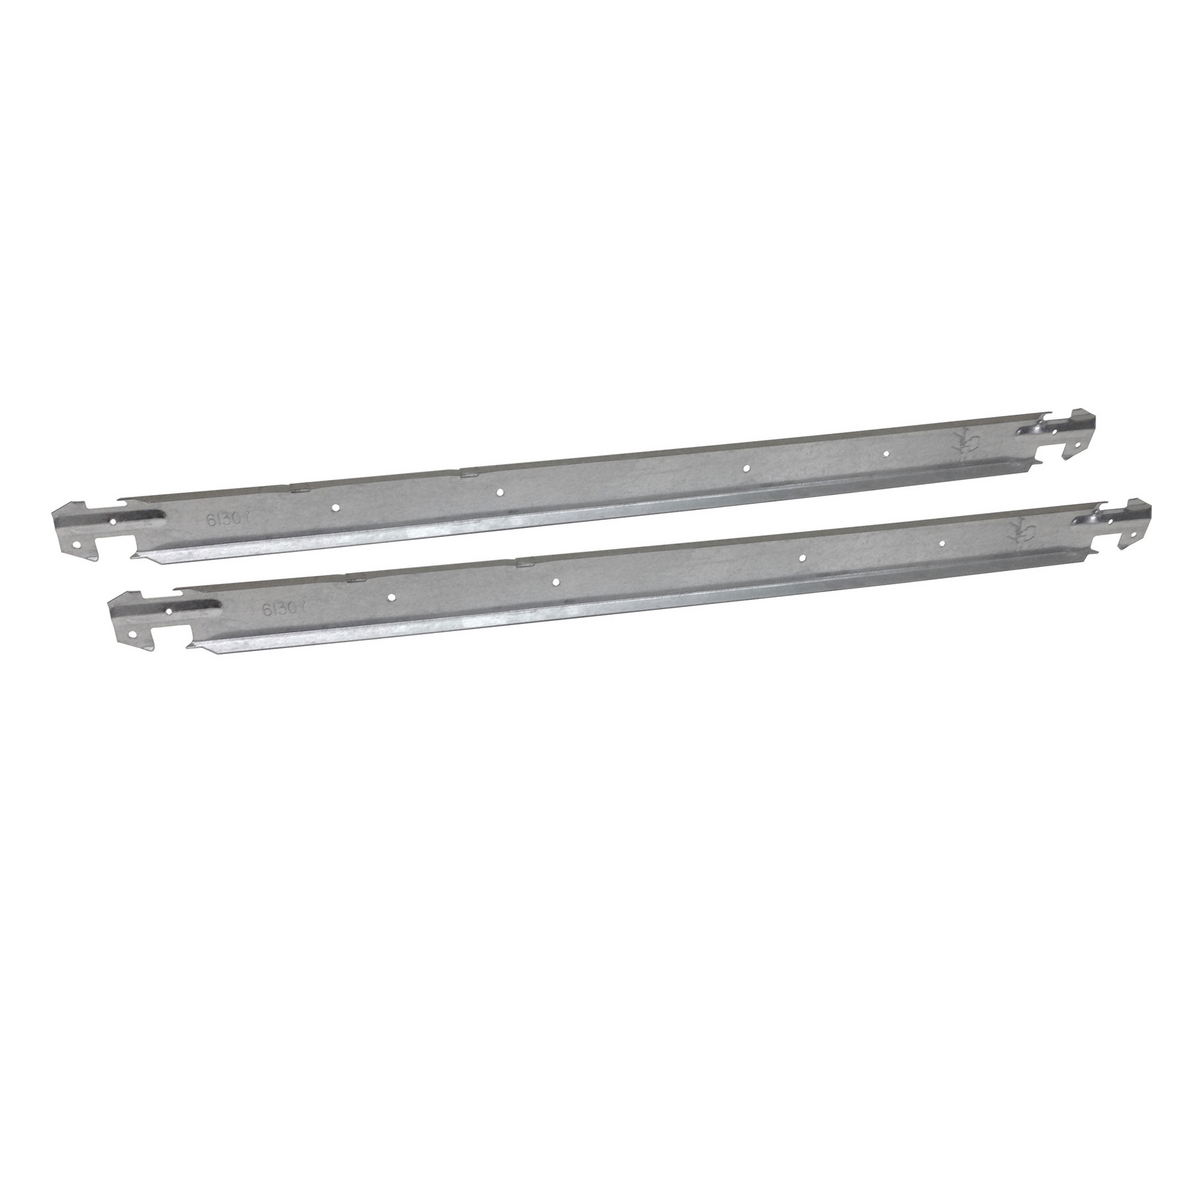 Recessed accessory - Bar hangers for T-bar for use with separate recessed housings and trims.